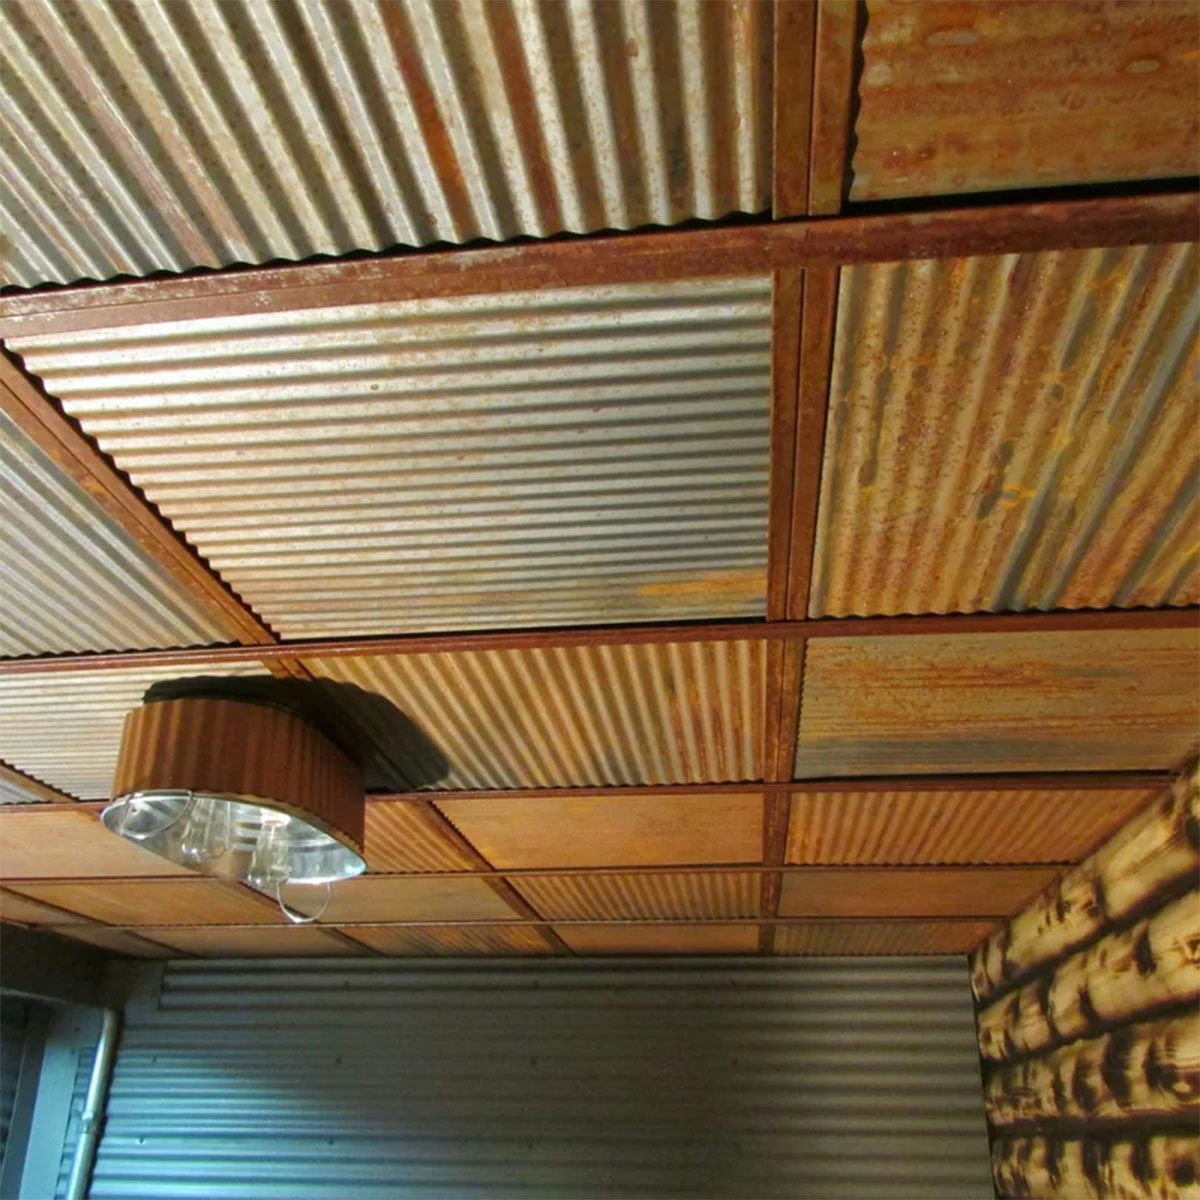 7 Ceiling Ideas to Give Your Garage Some Flair